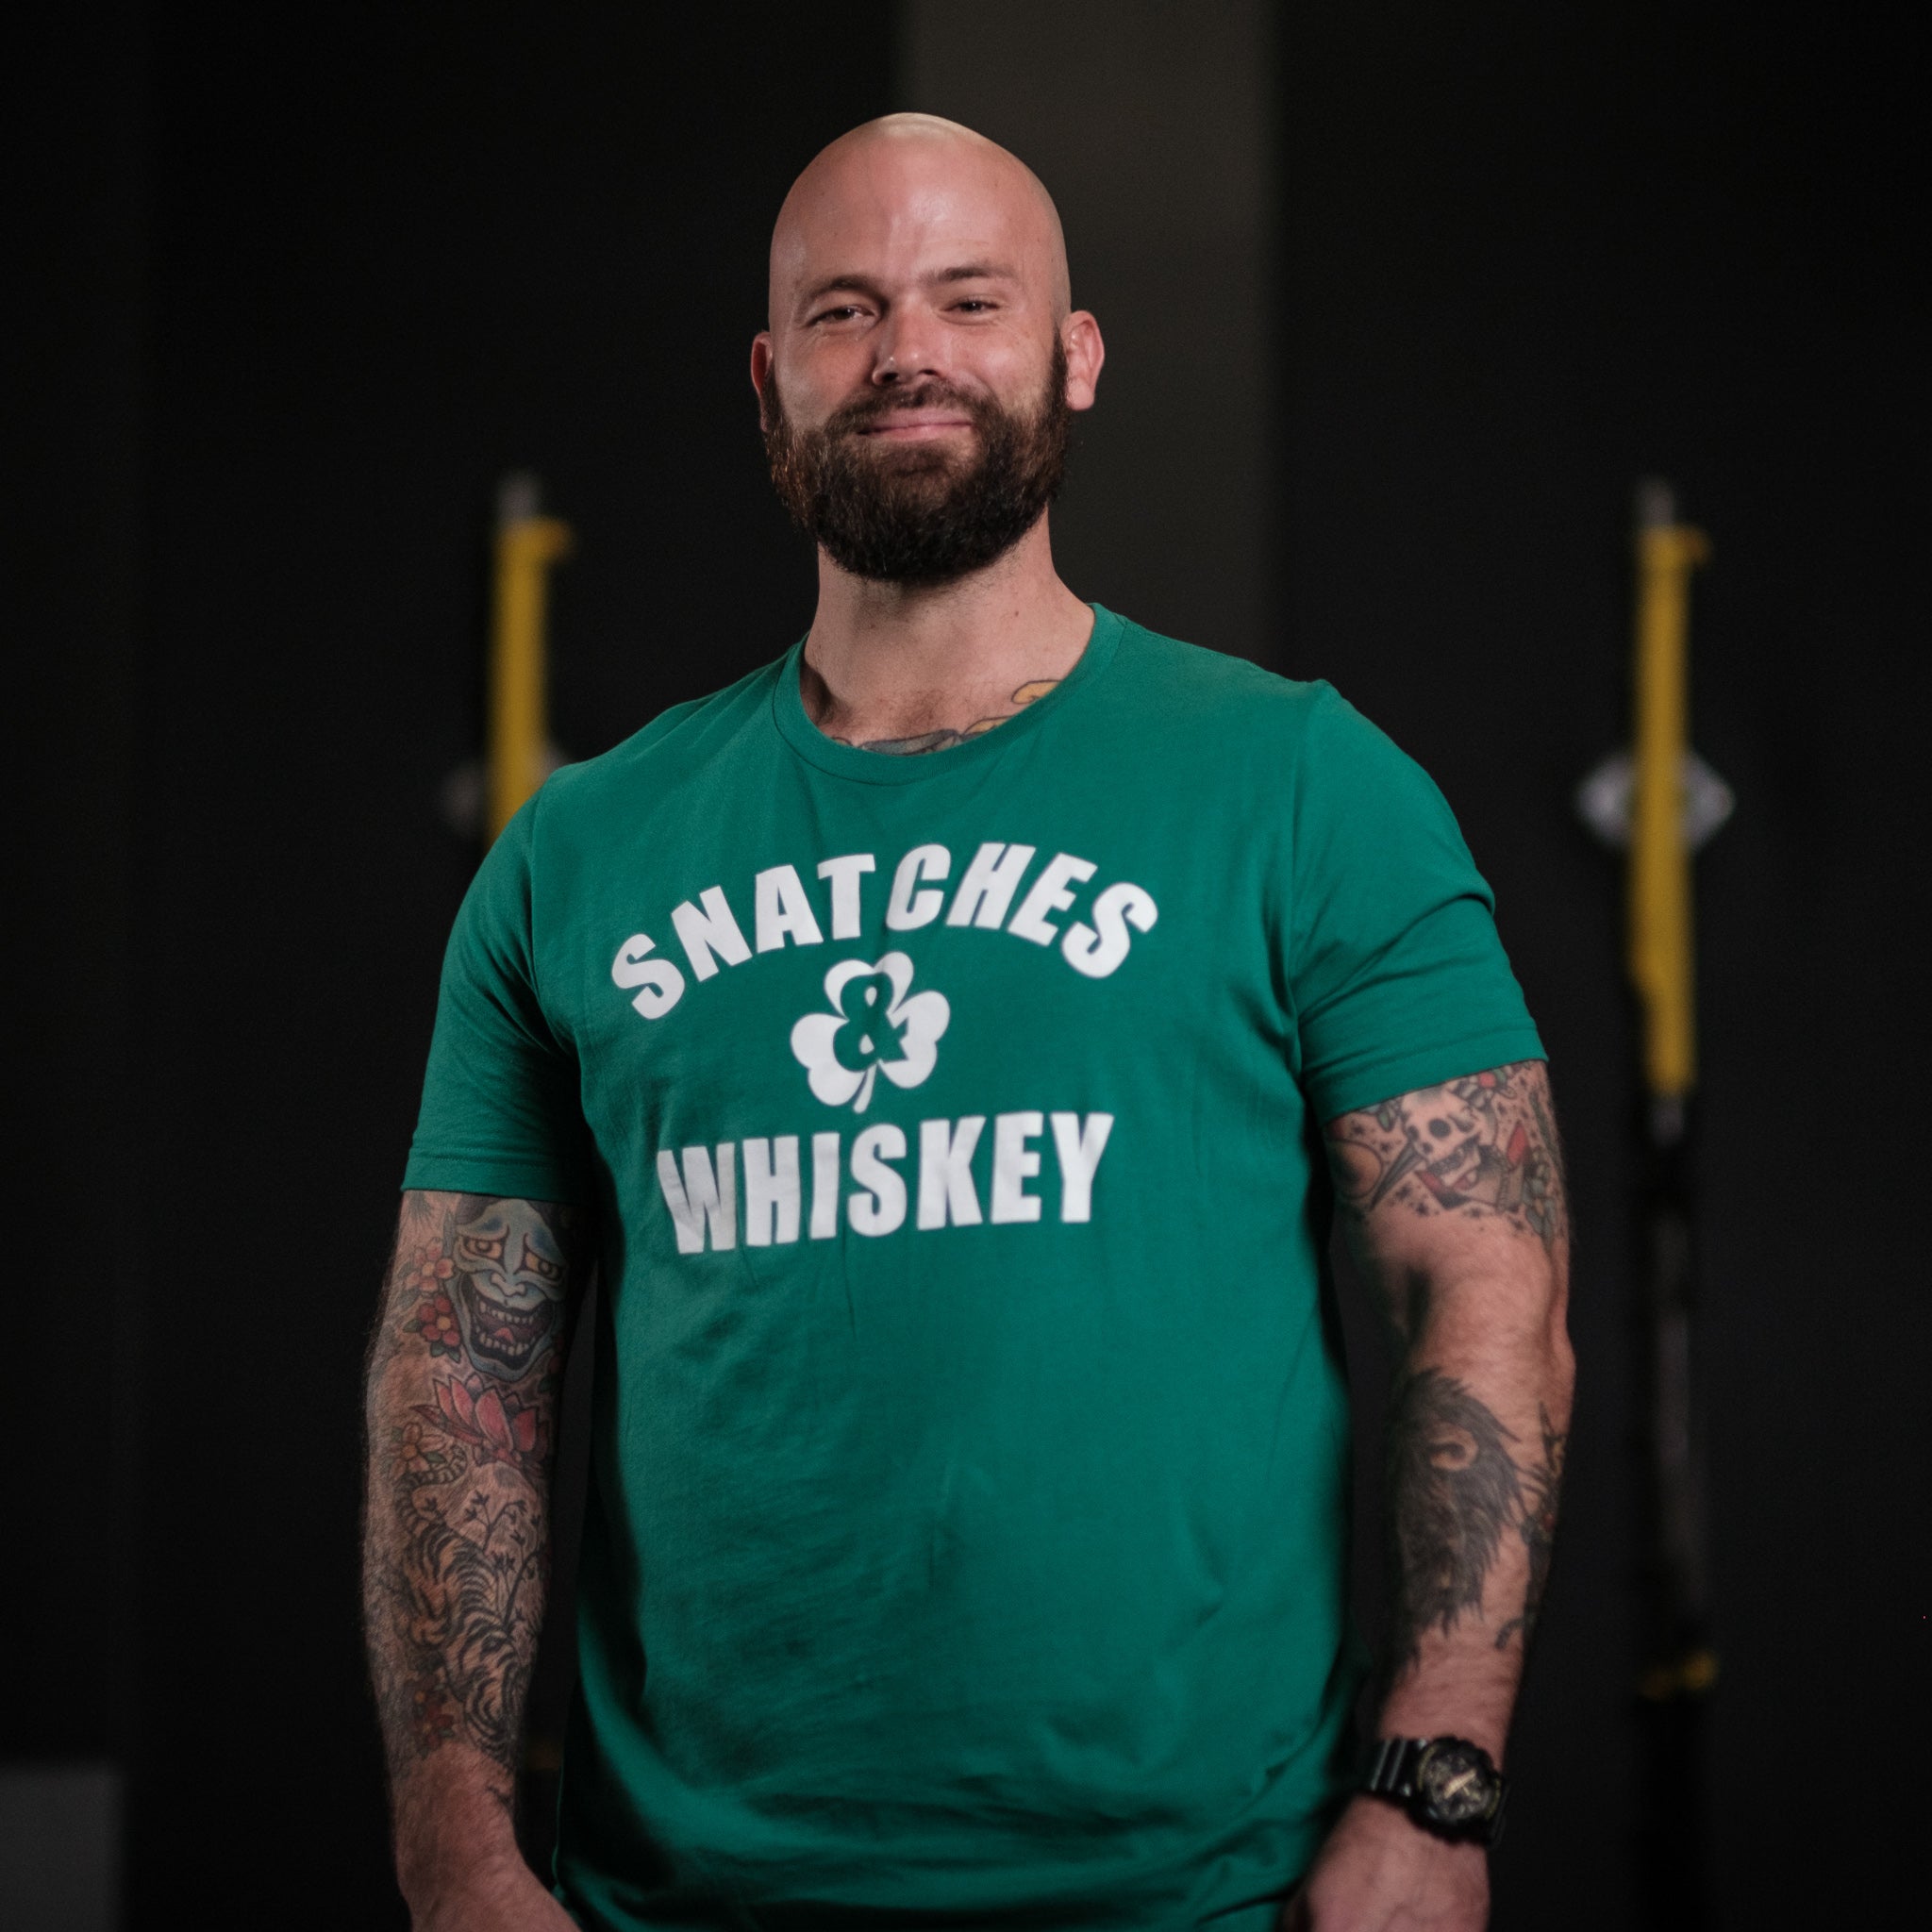 Snatches & Whiskey - Tee